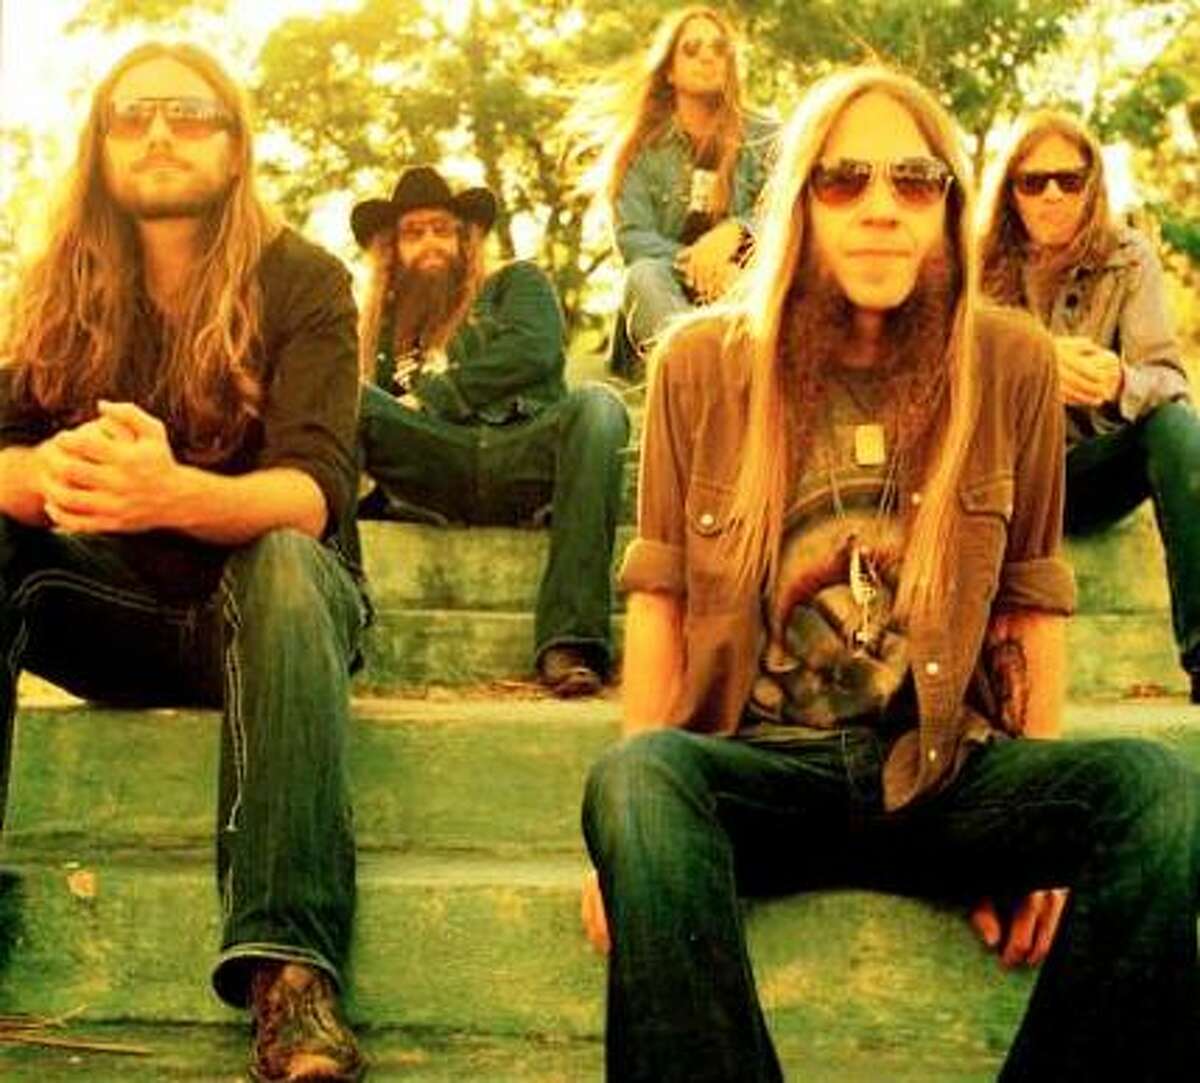 Atlanta outlaw country/rock band Blackberry Smoke will play on Saturday at Floore’s.